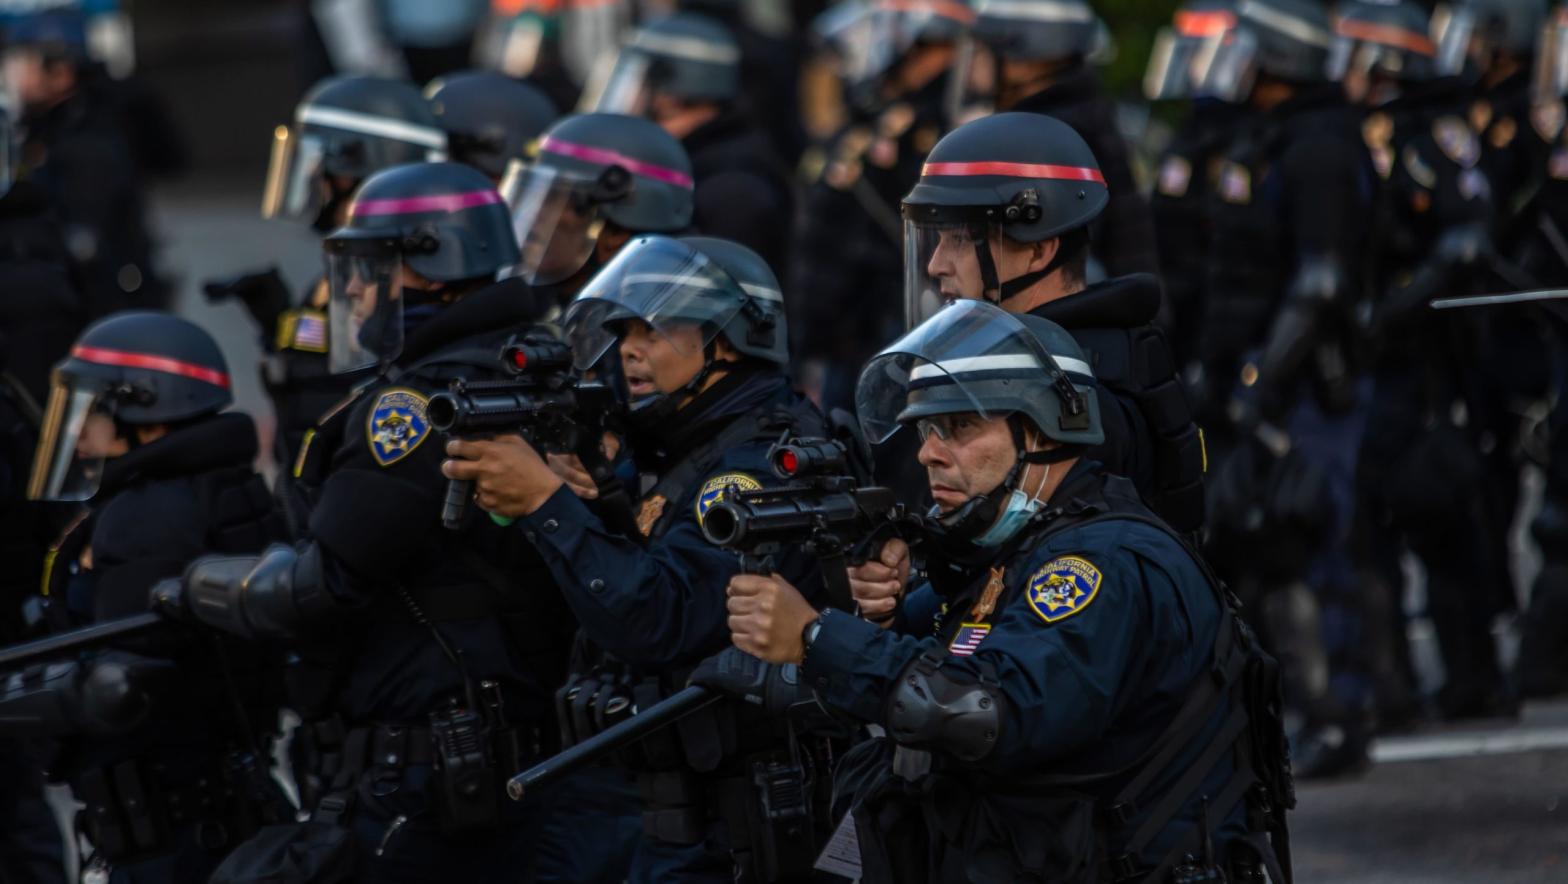 Police officers in Los Angeles wielding weapons during the recent protests against police brutality. (Photo: Apu Gomes/AFP, Getty Images)